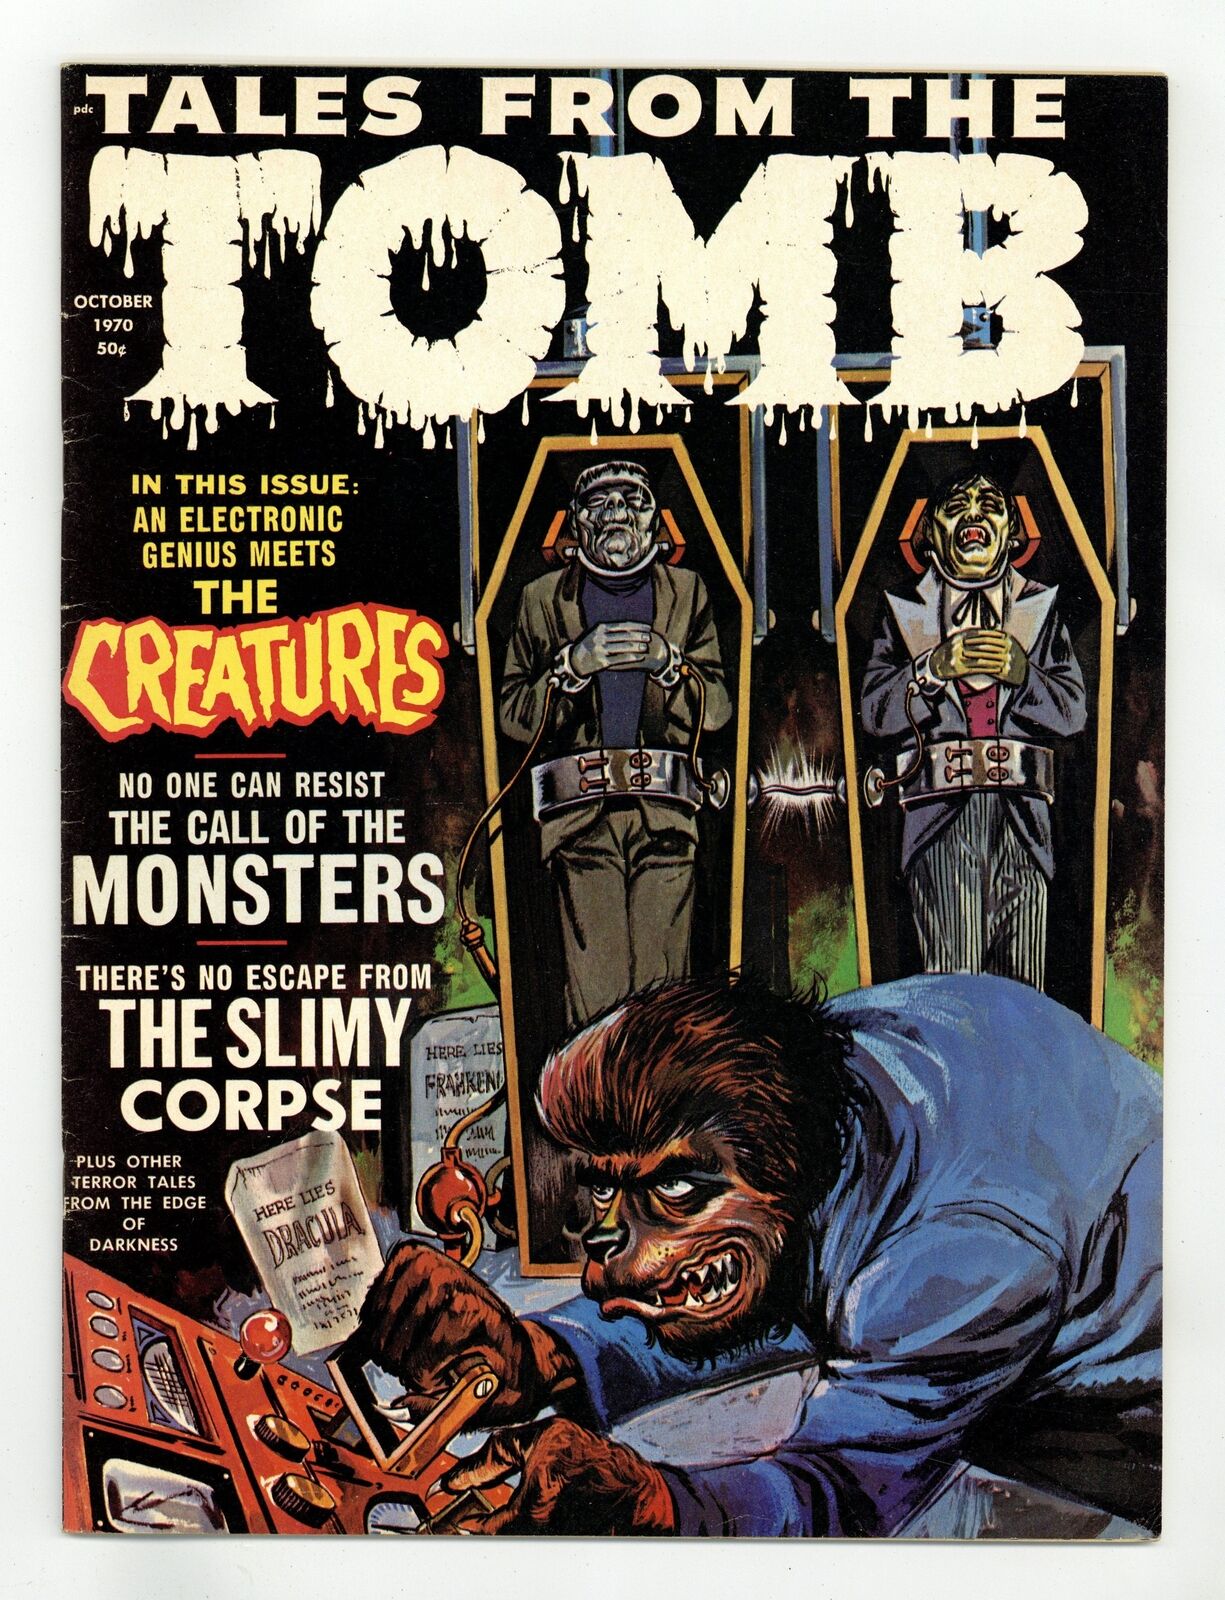 Tales from the Tomb Vol. 2 #5 FN/VF 7.0 1970